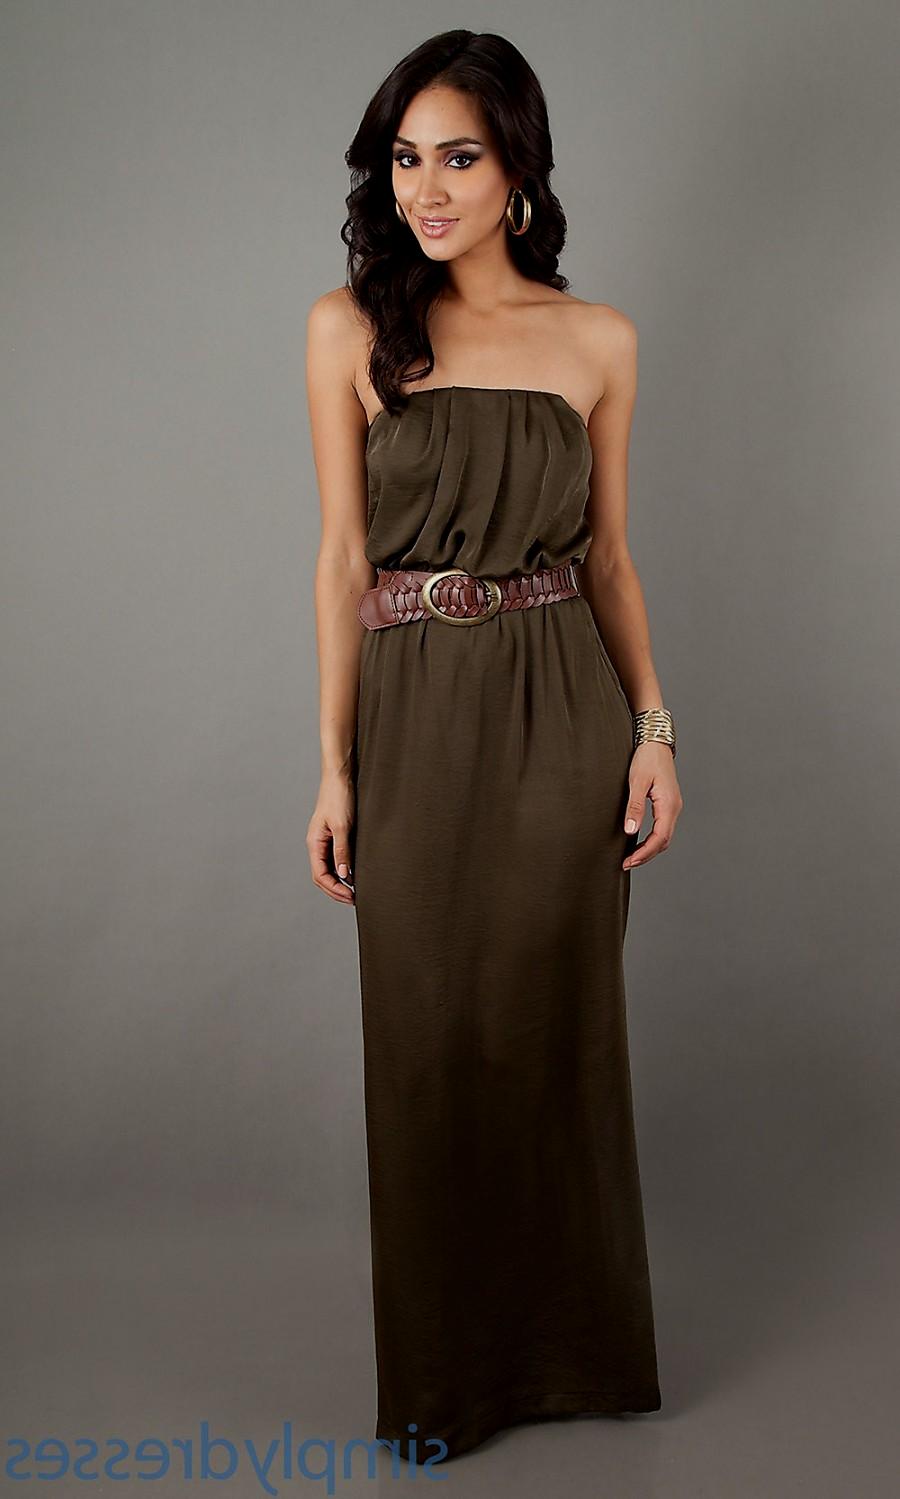 Long Halter Dresses For Summer - Fashion Outlet Review